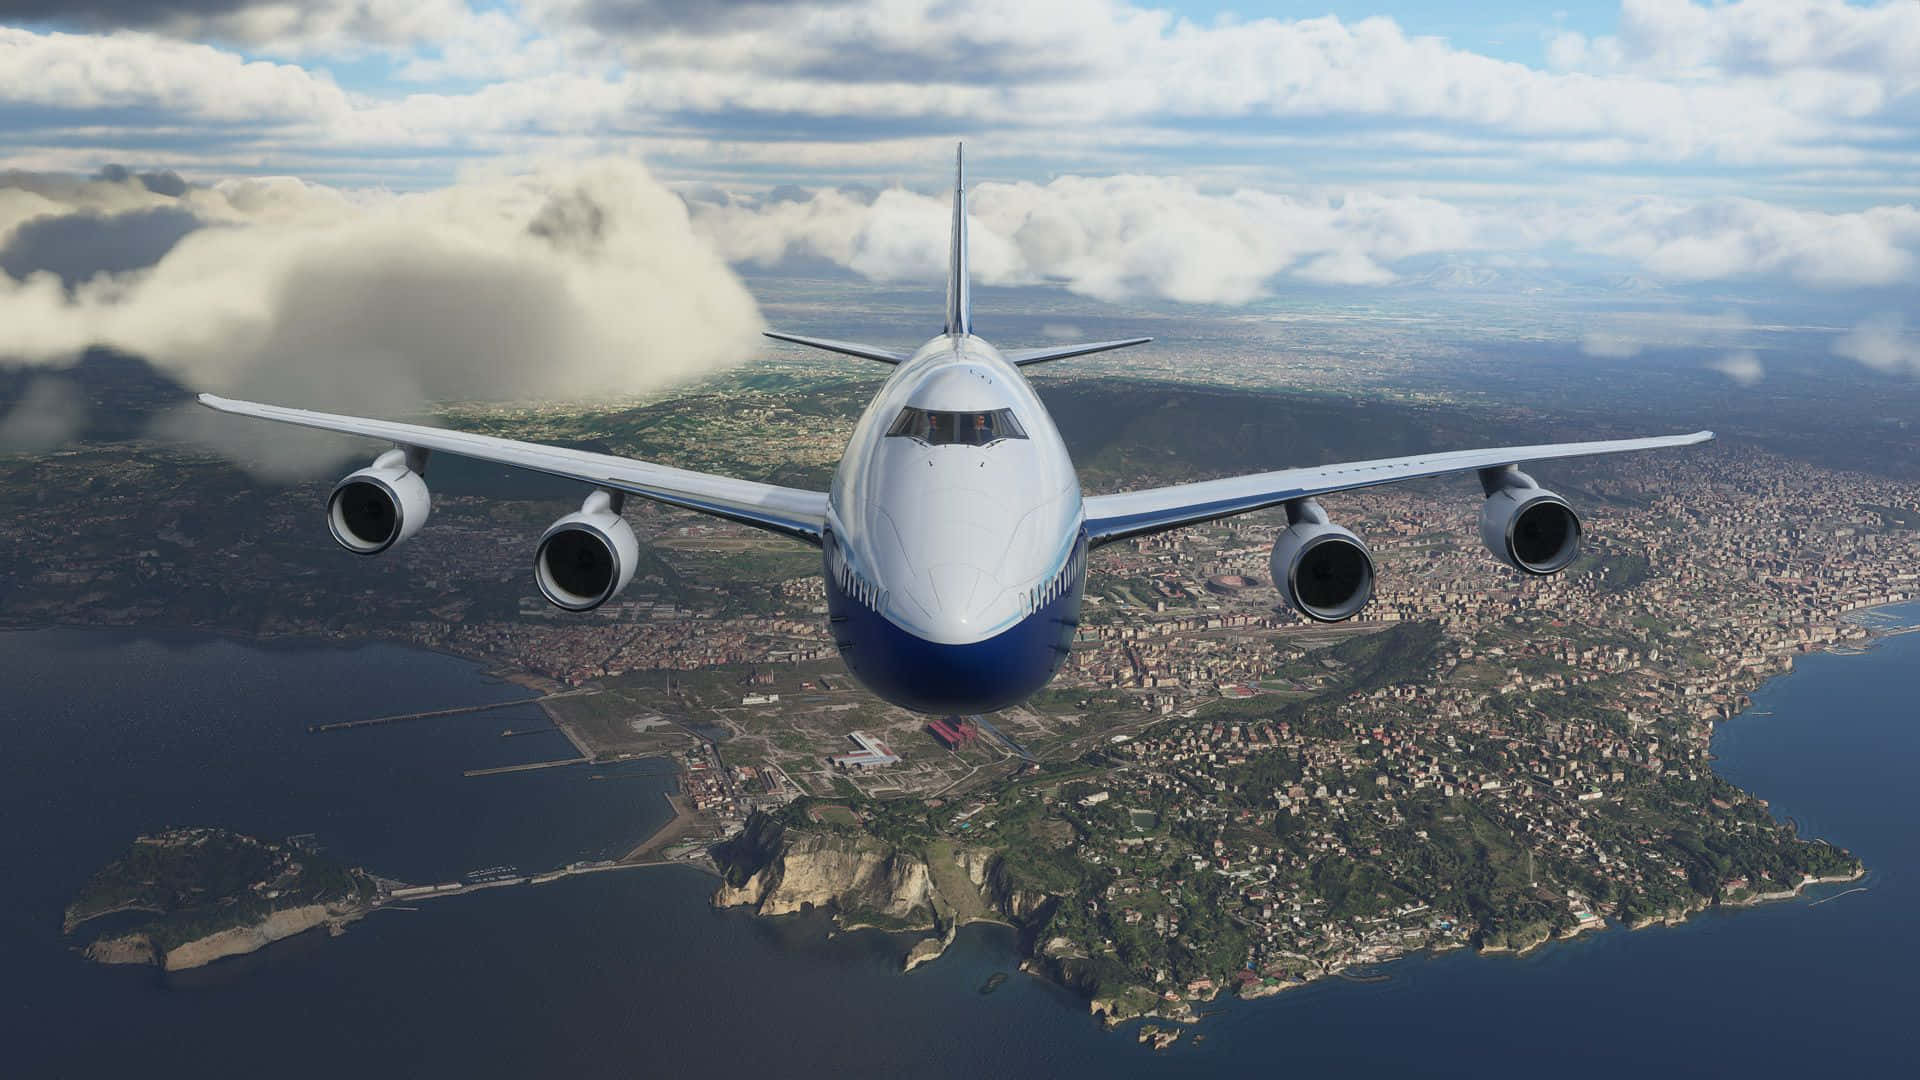 A Large Airplane Flying Over A City And Ocean